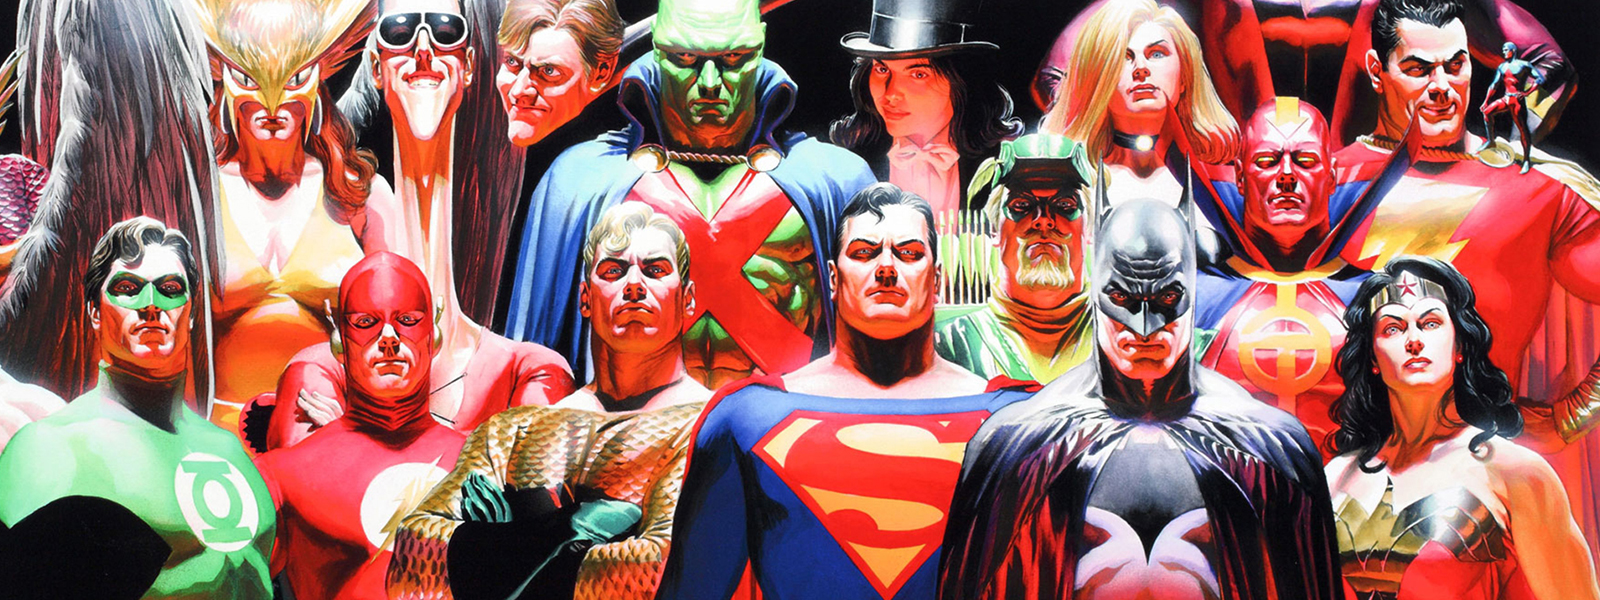 dc main continuity reading order banner art